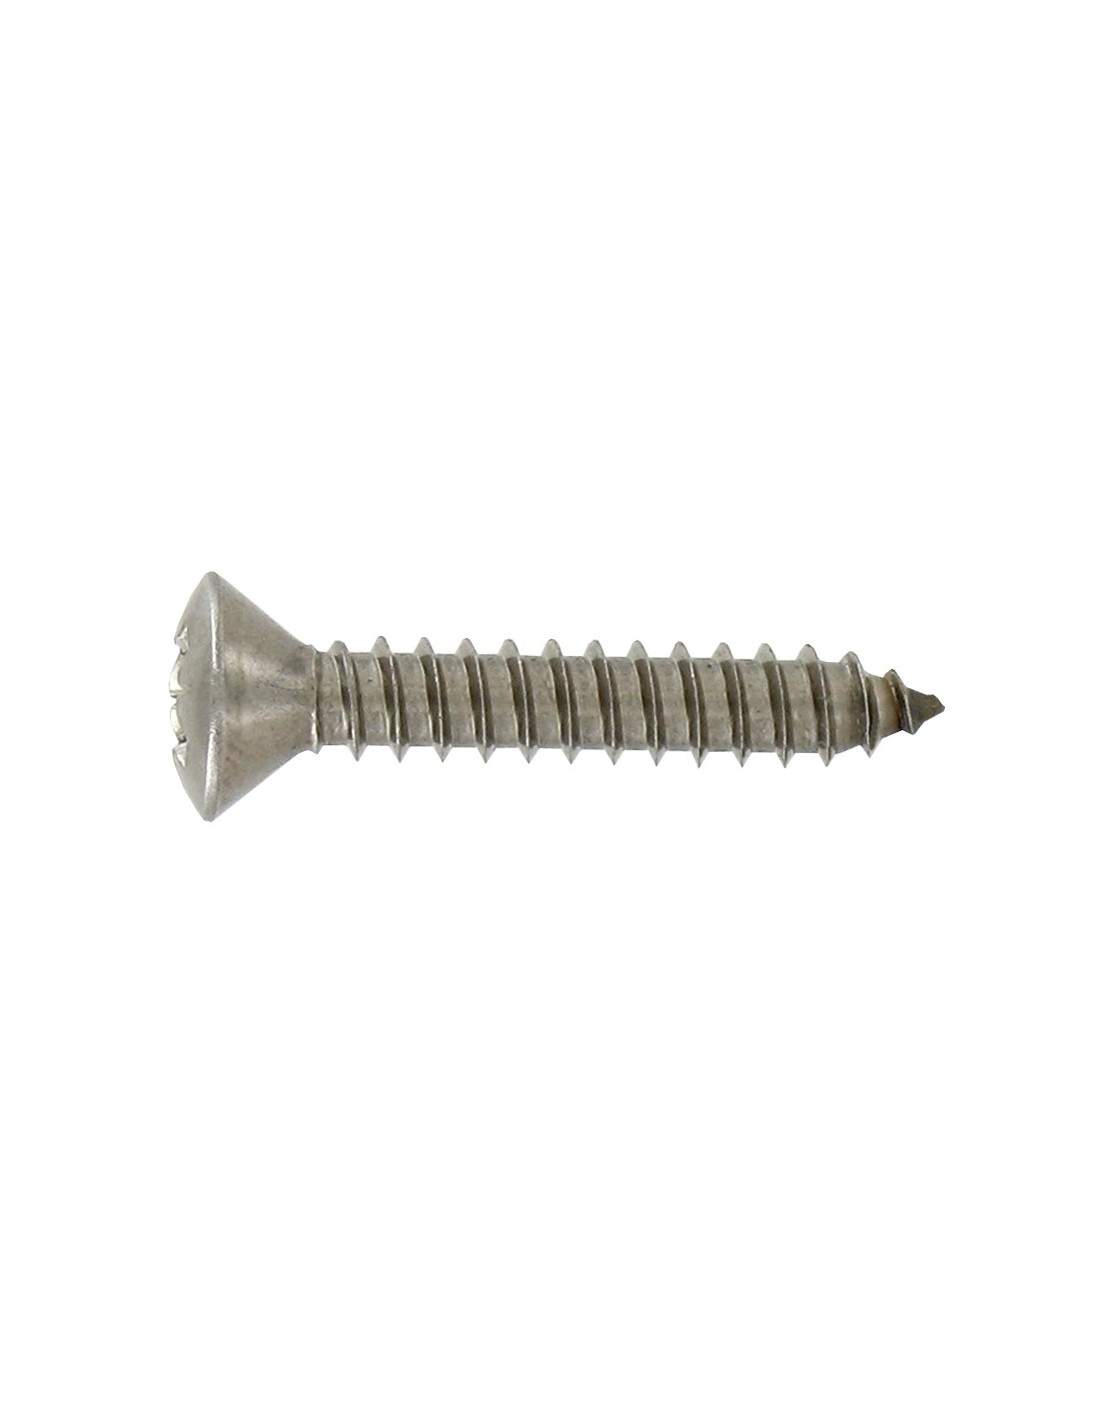  Countersunk-head tapping screw, stainless steel A4 3.9x16, 27 pcs.